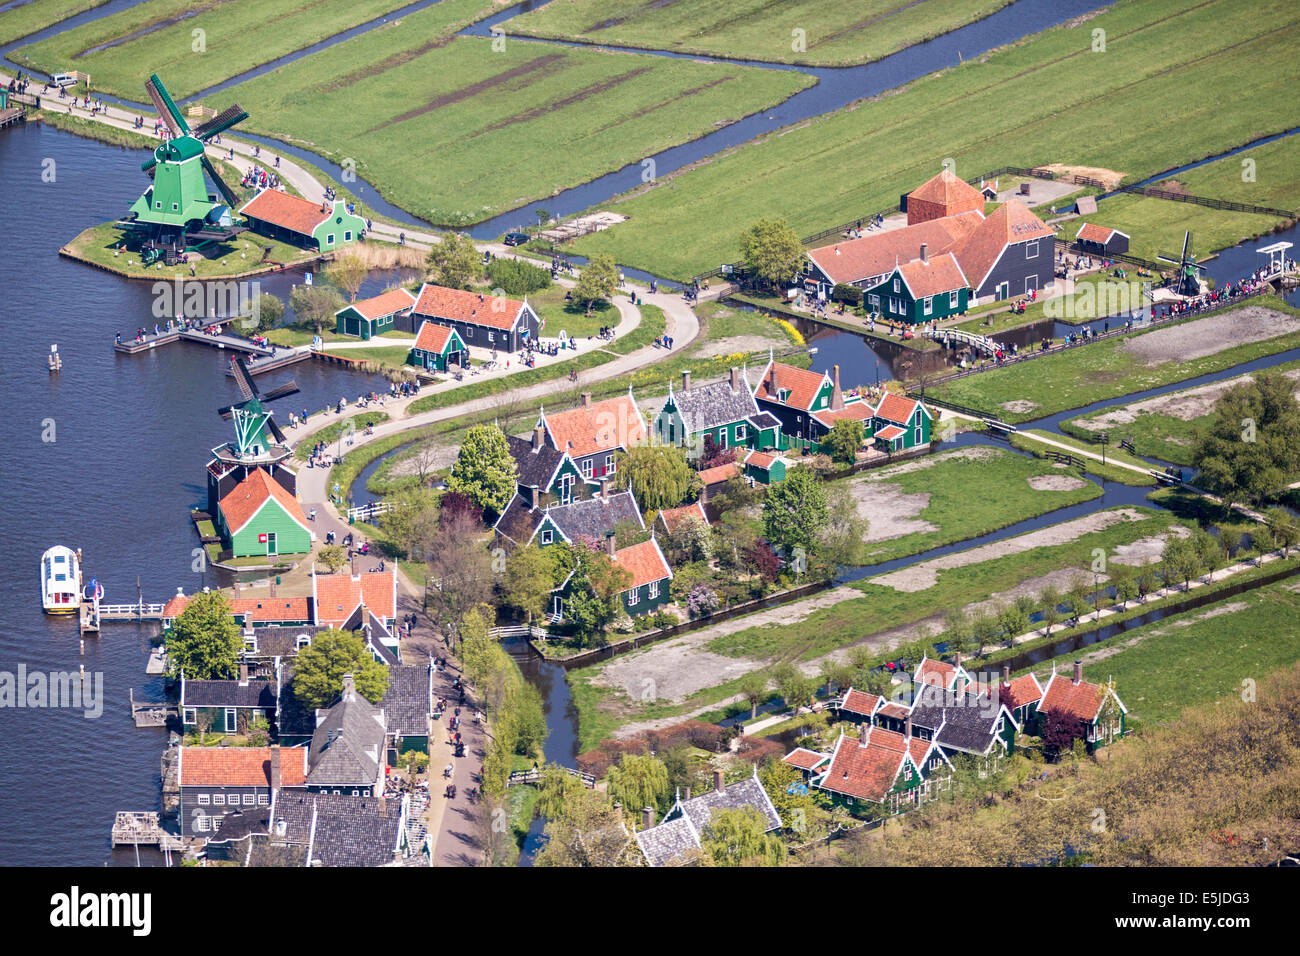 The Netherlands, Zaanse Schans. The outdoor museum has a collection of well-preserved historic windmills and houses. Aerial Stock Photo